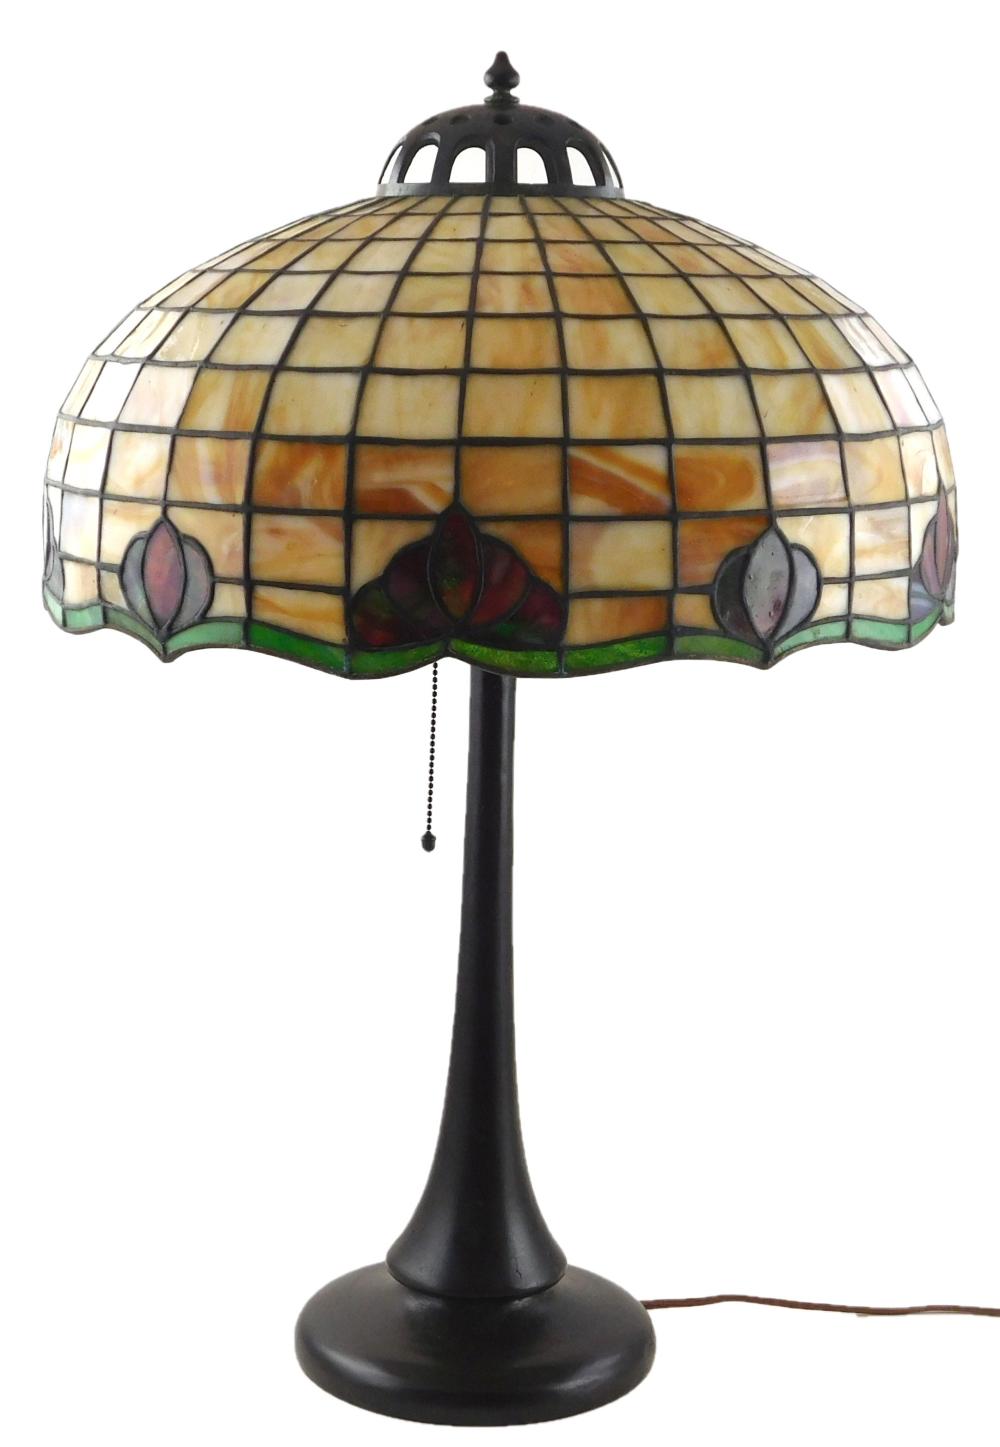 LAMP: HANDEL TABLE LAMP WITH LEADED